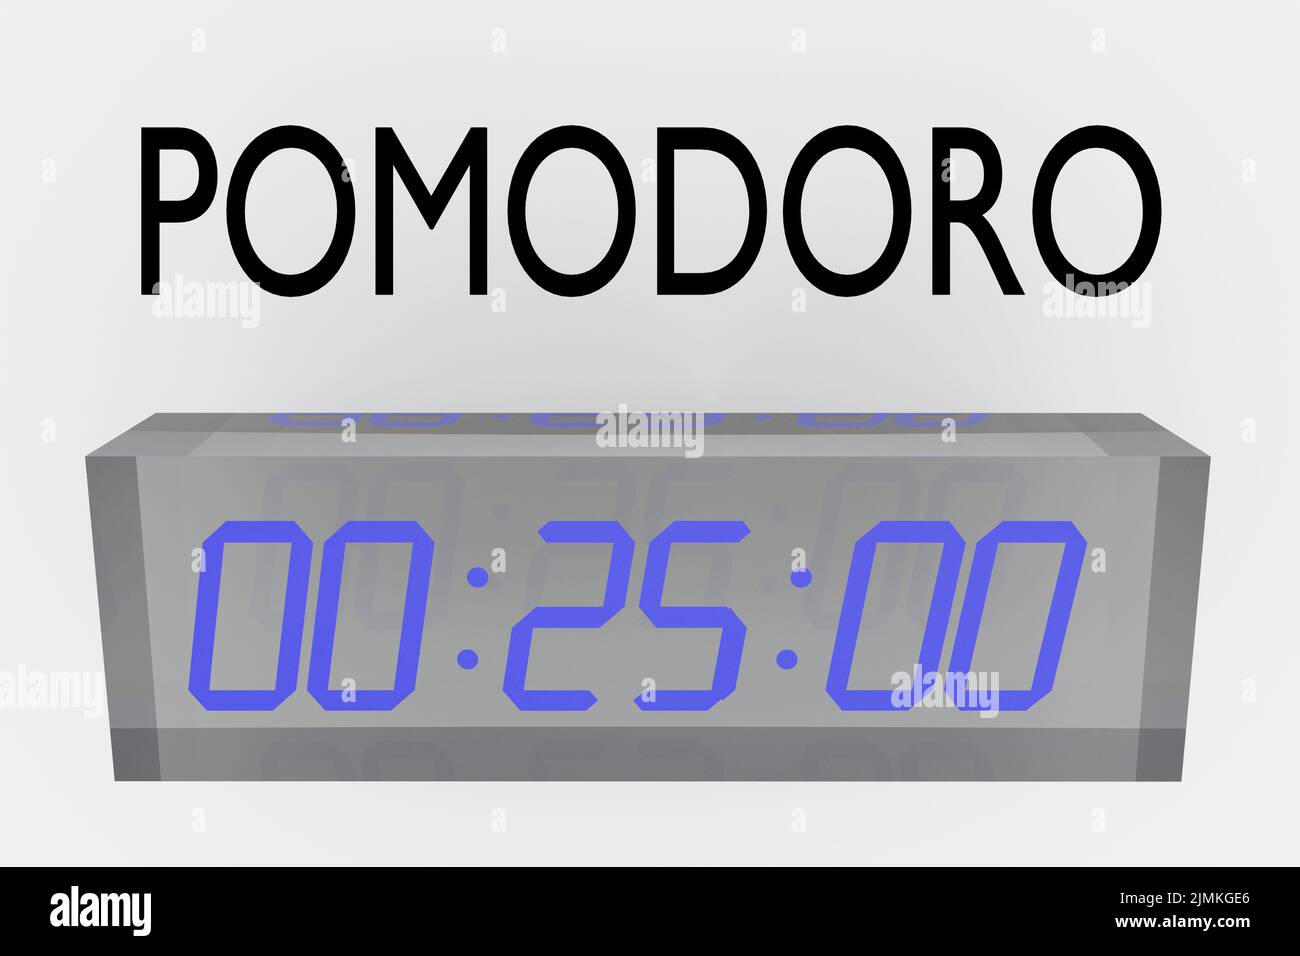 3D illustration of POMODORO title over a digital clock displaying 25 minutes, a typical length of time intervals separated by short breaks in Pomodoro Stock Photo